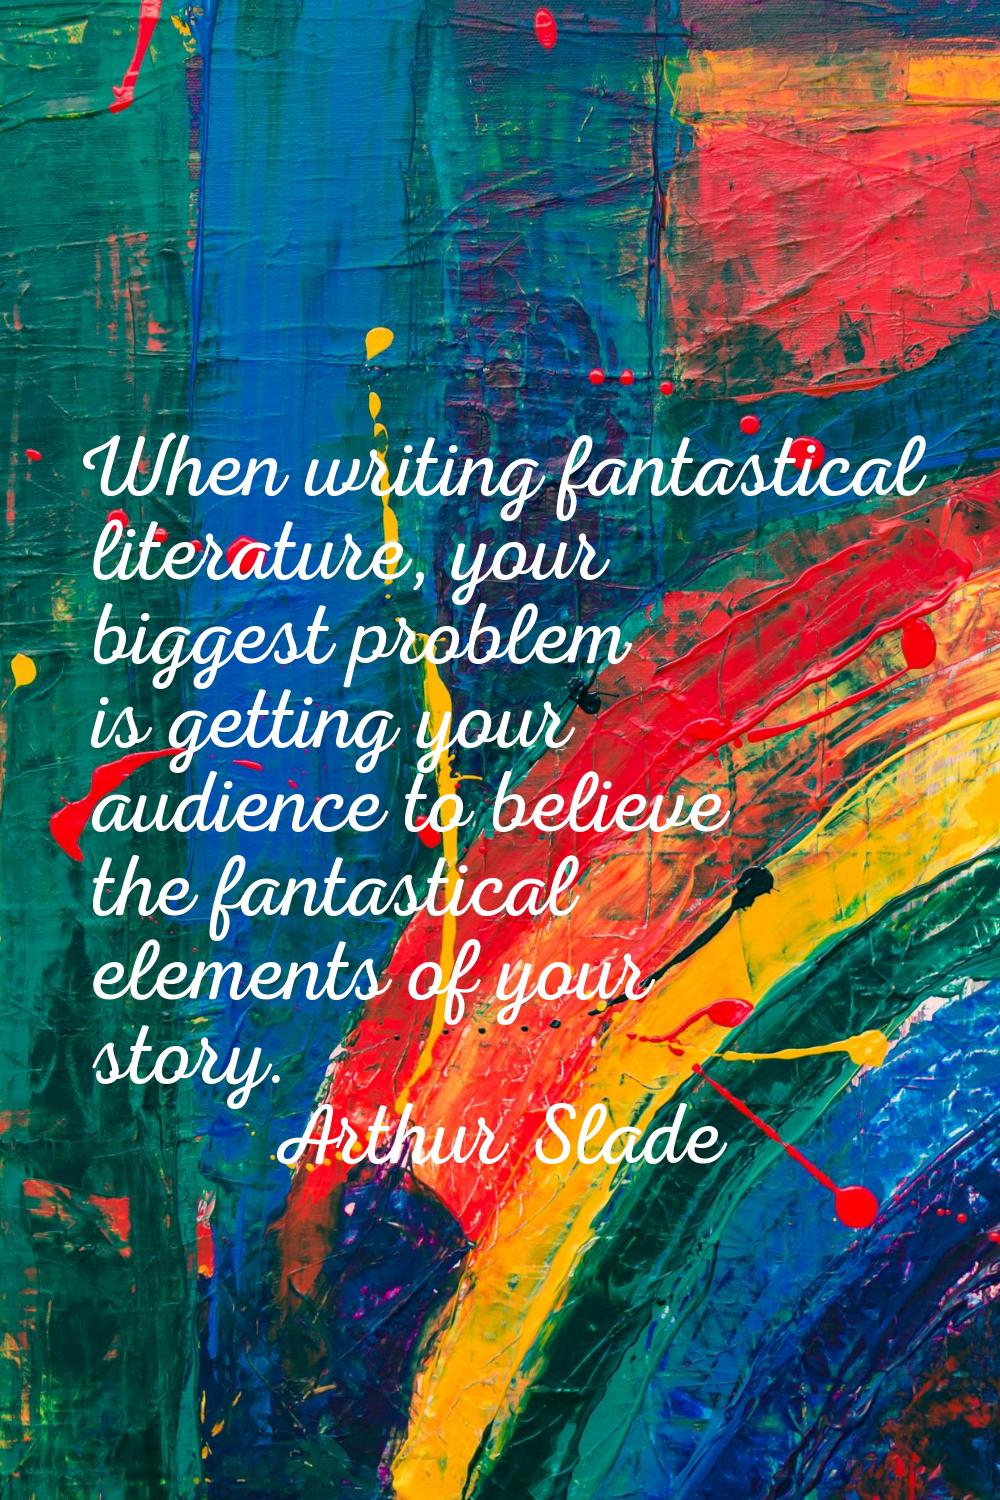 When writing fantastical literature, your biggest problem is getting your audience to believe the f